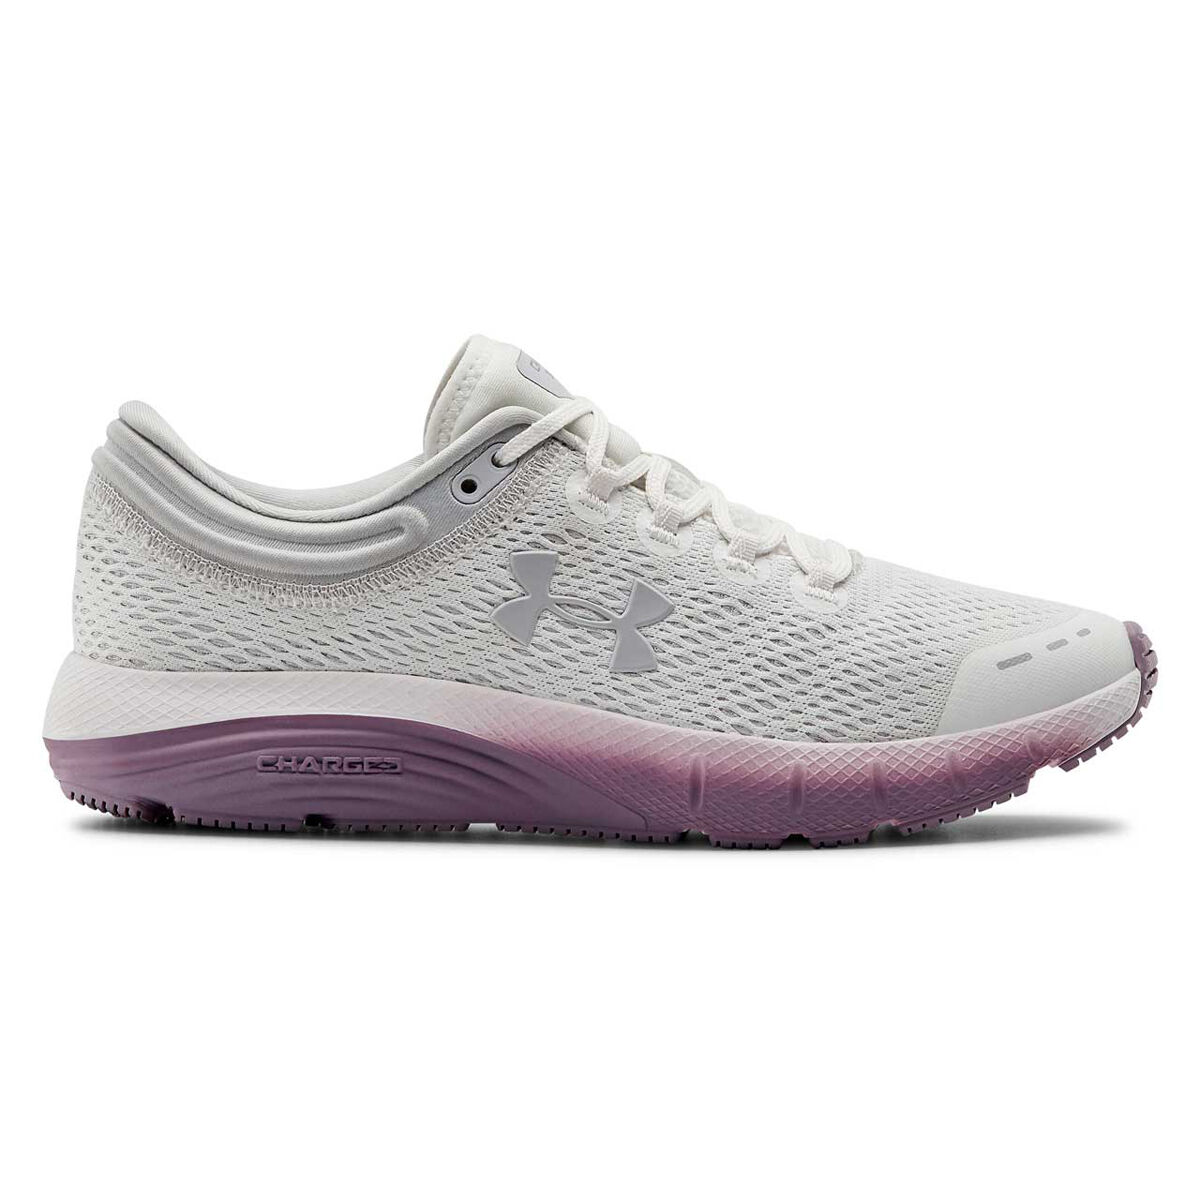 Under Armour Charged Bandit 5 Womens 